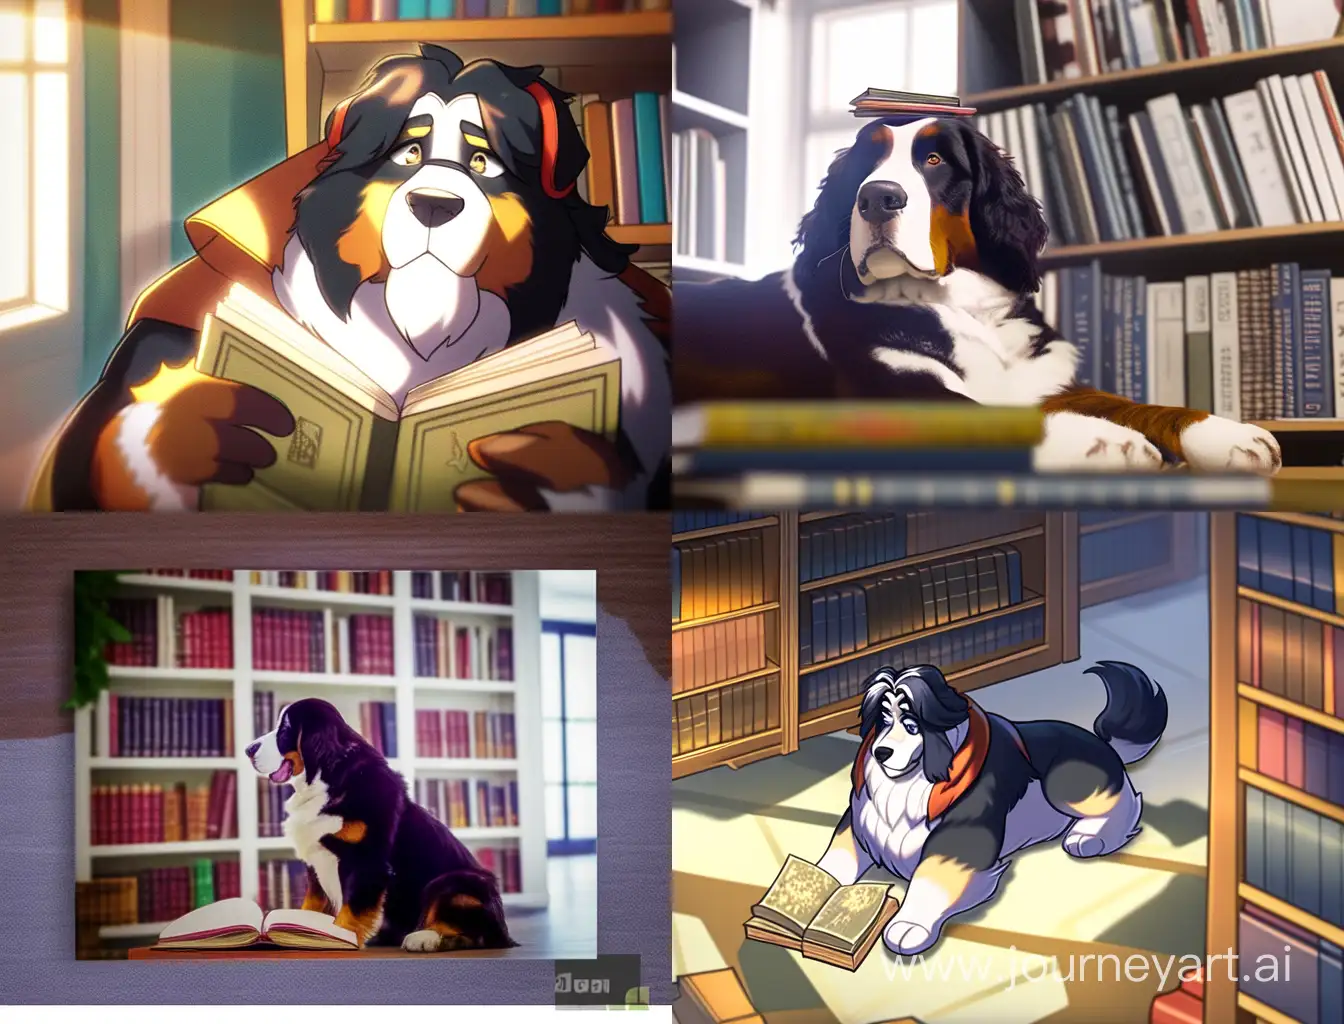 Intelligent-Bernese-Mountain-Dog-Engrossed-in-Library-Reading